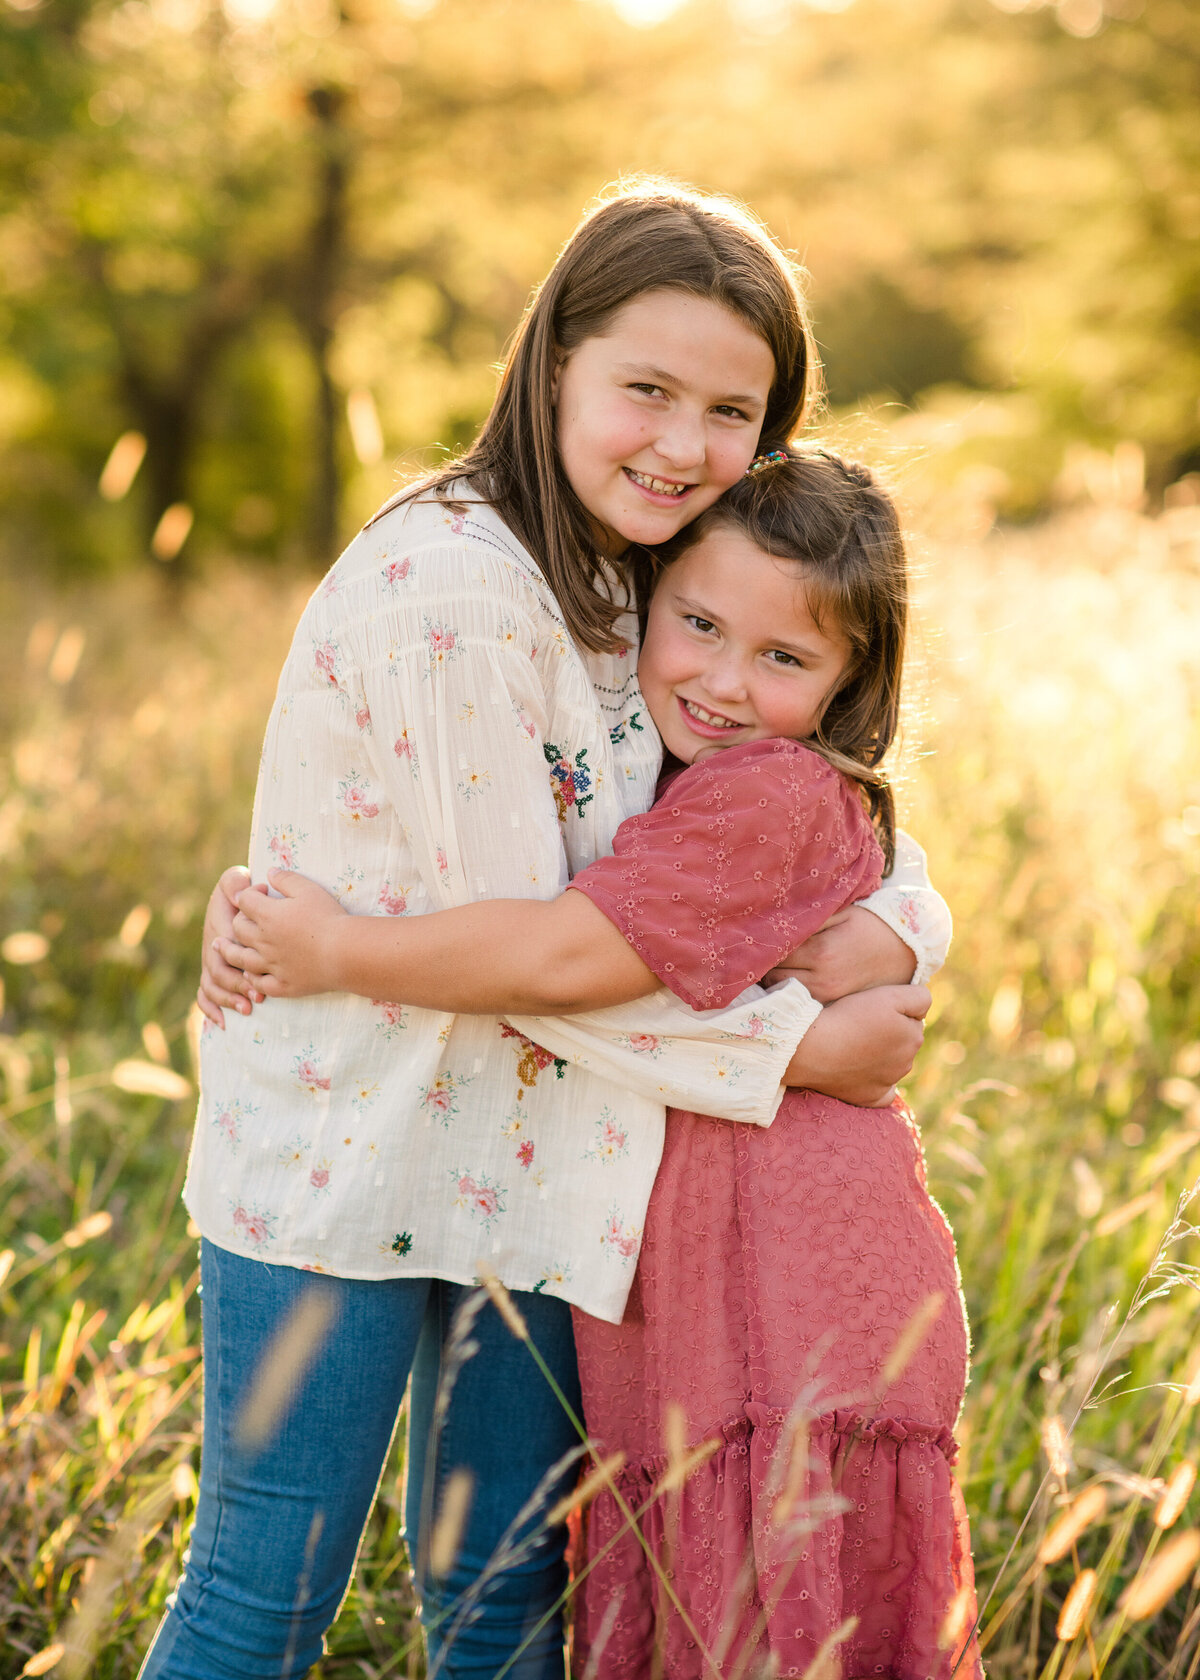 Des-Moines-Iowa-Family-Photographer-Theresa-Schumacher-Photography-Golden-Hour-Grass-Sisters-Hugging